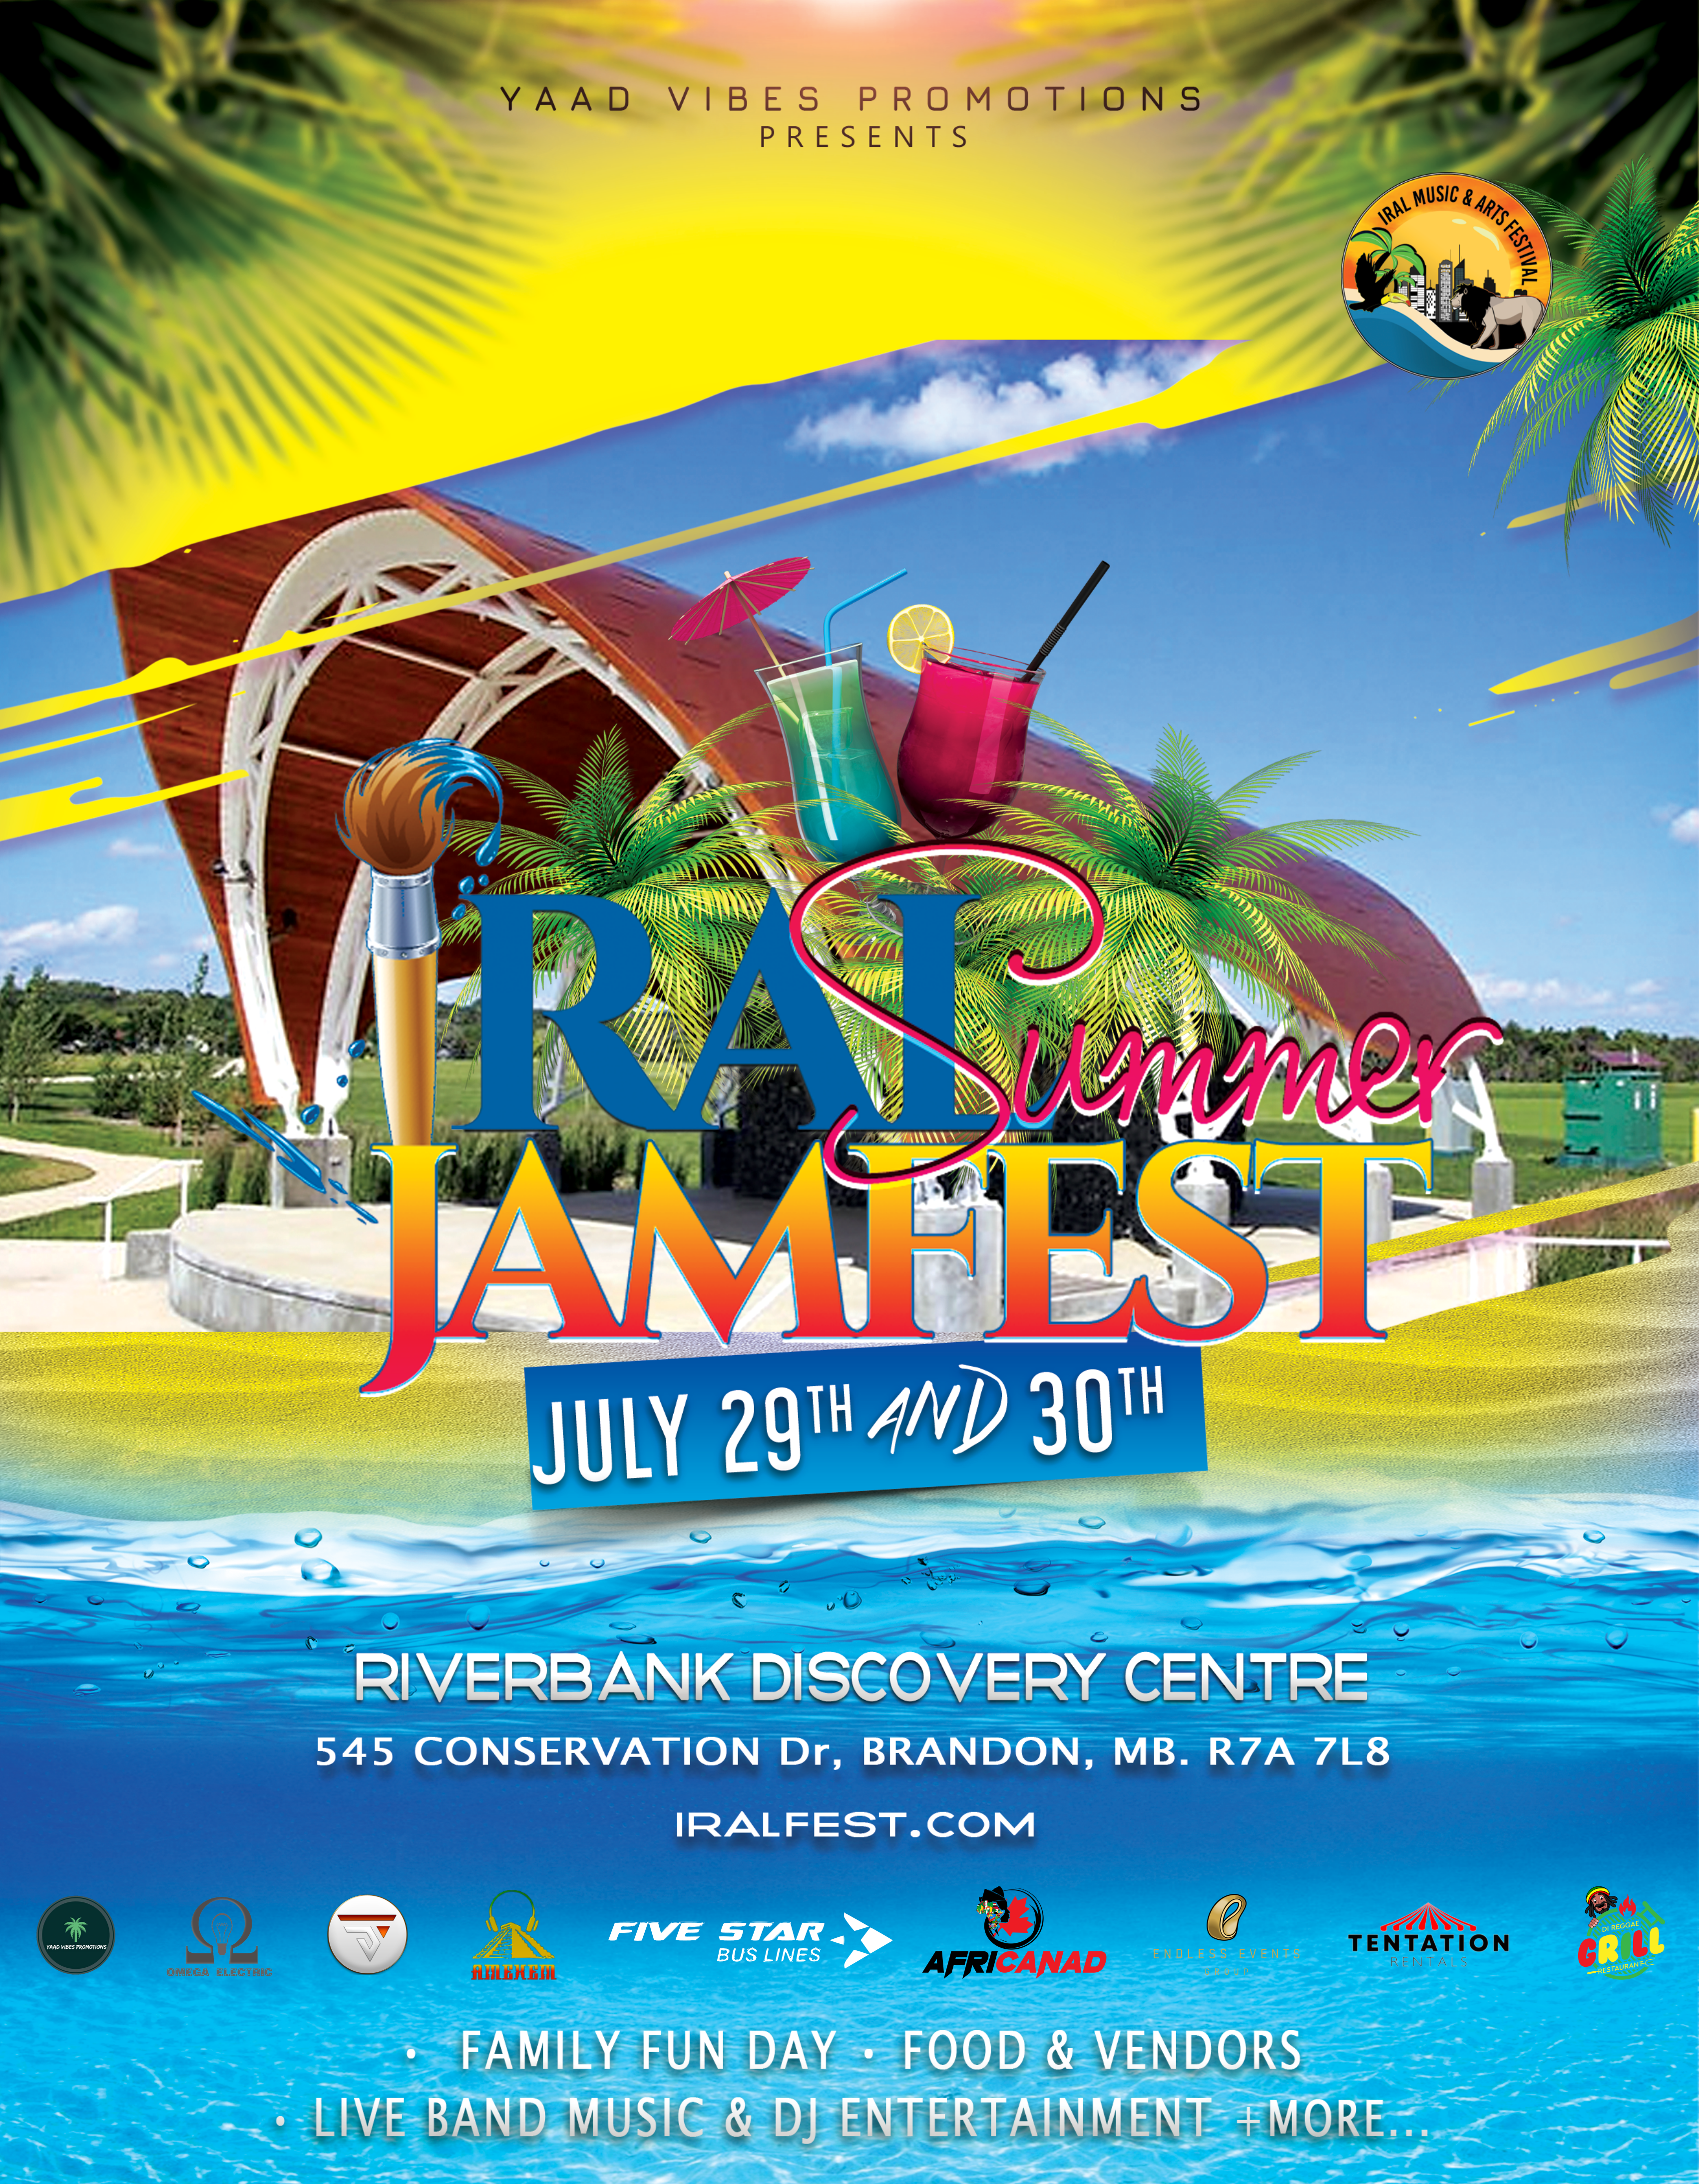 IRAL Summer Jam Fest - Riverbank Discovery Centre Logo